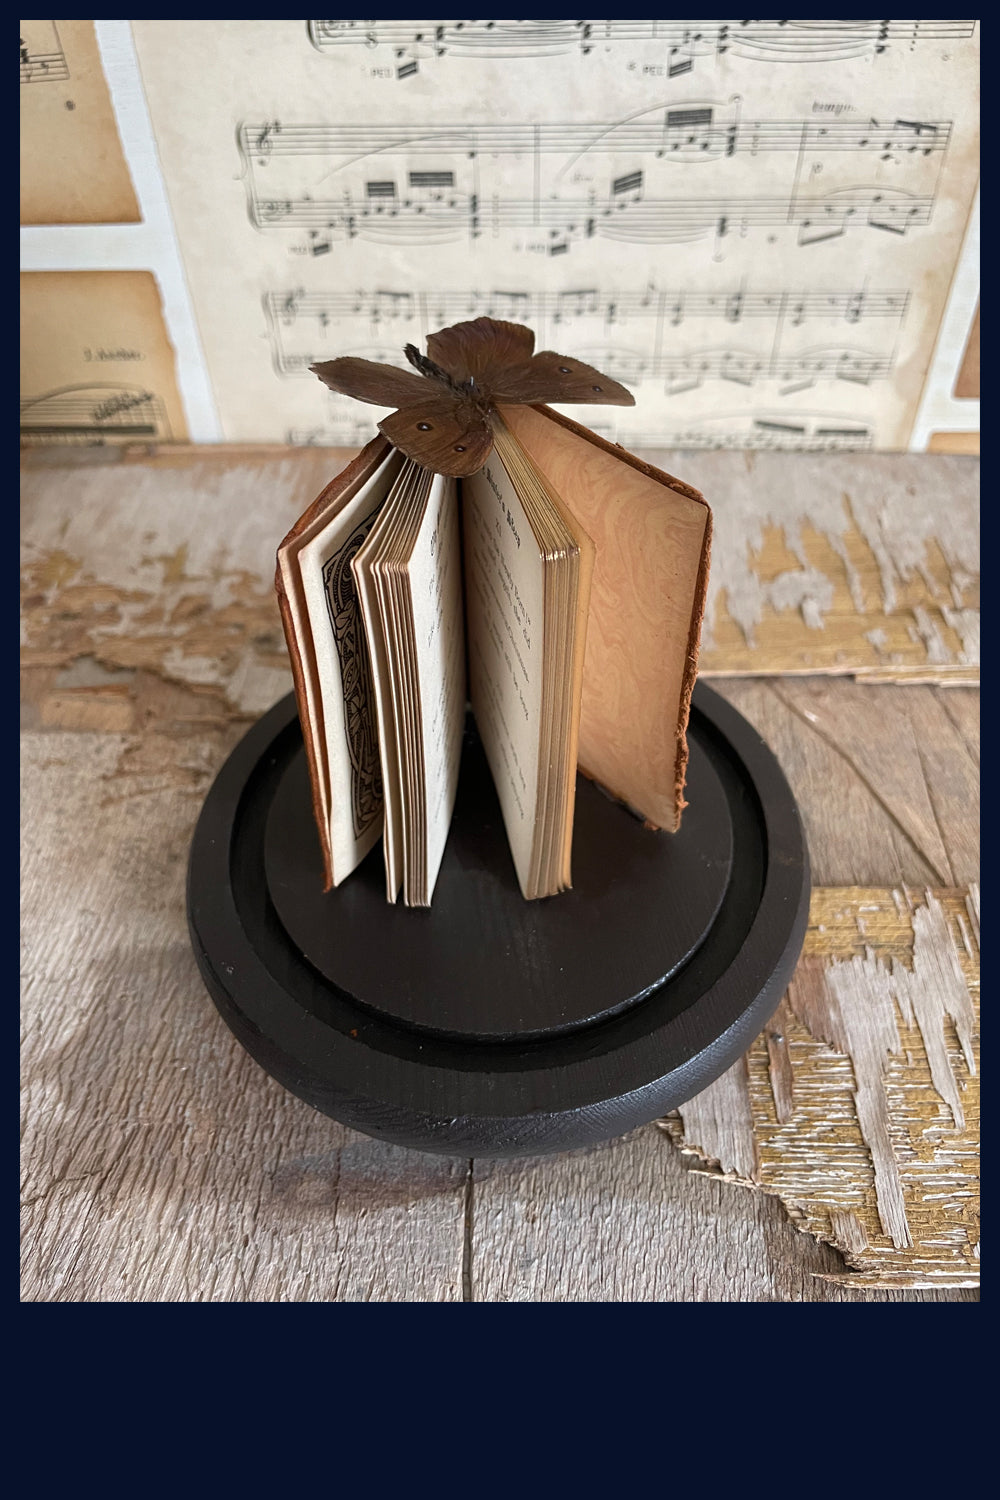 SOLD Enigma Variations Collection: Miniature Antique Book - Poems of Dante Rossetti with a Vintage Butterfly in a Display Dome